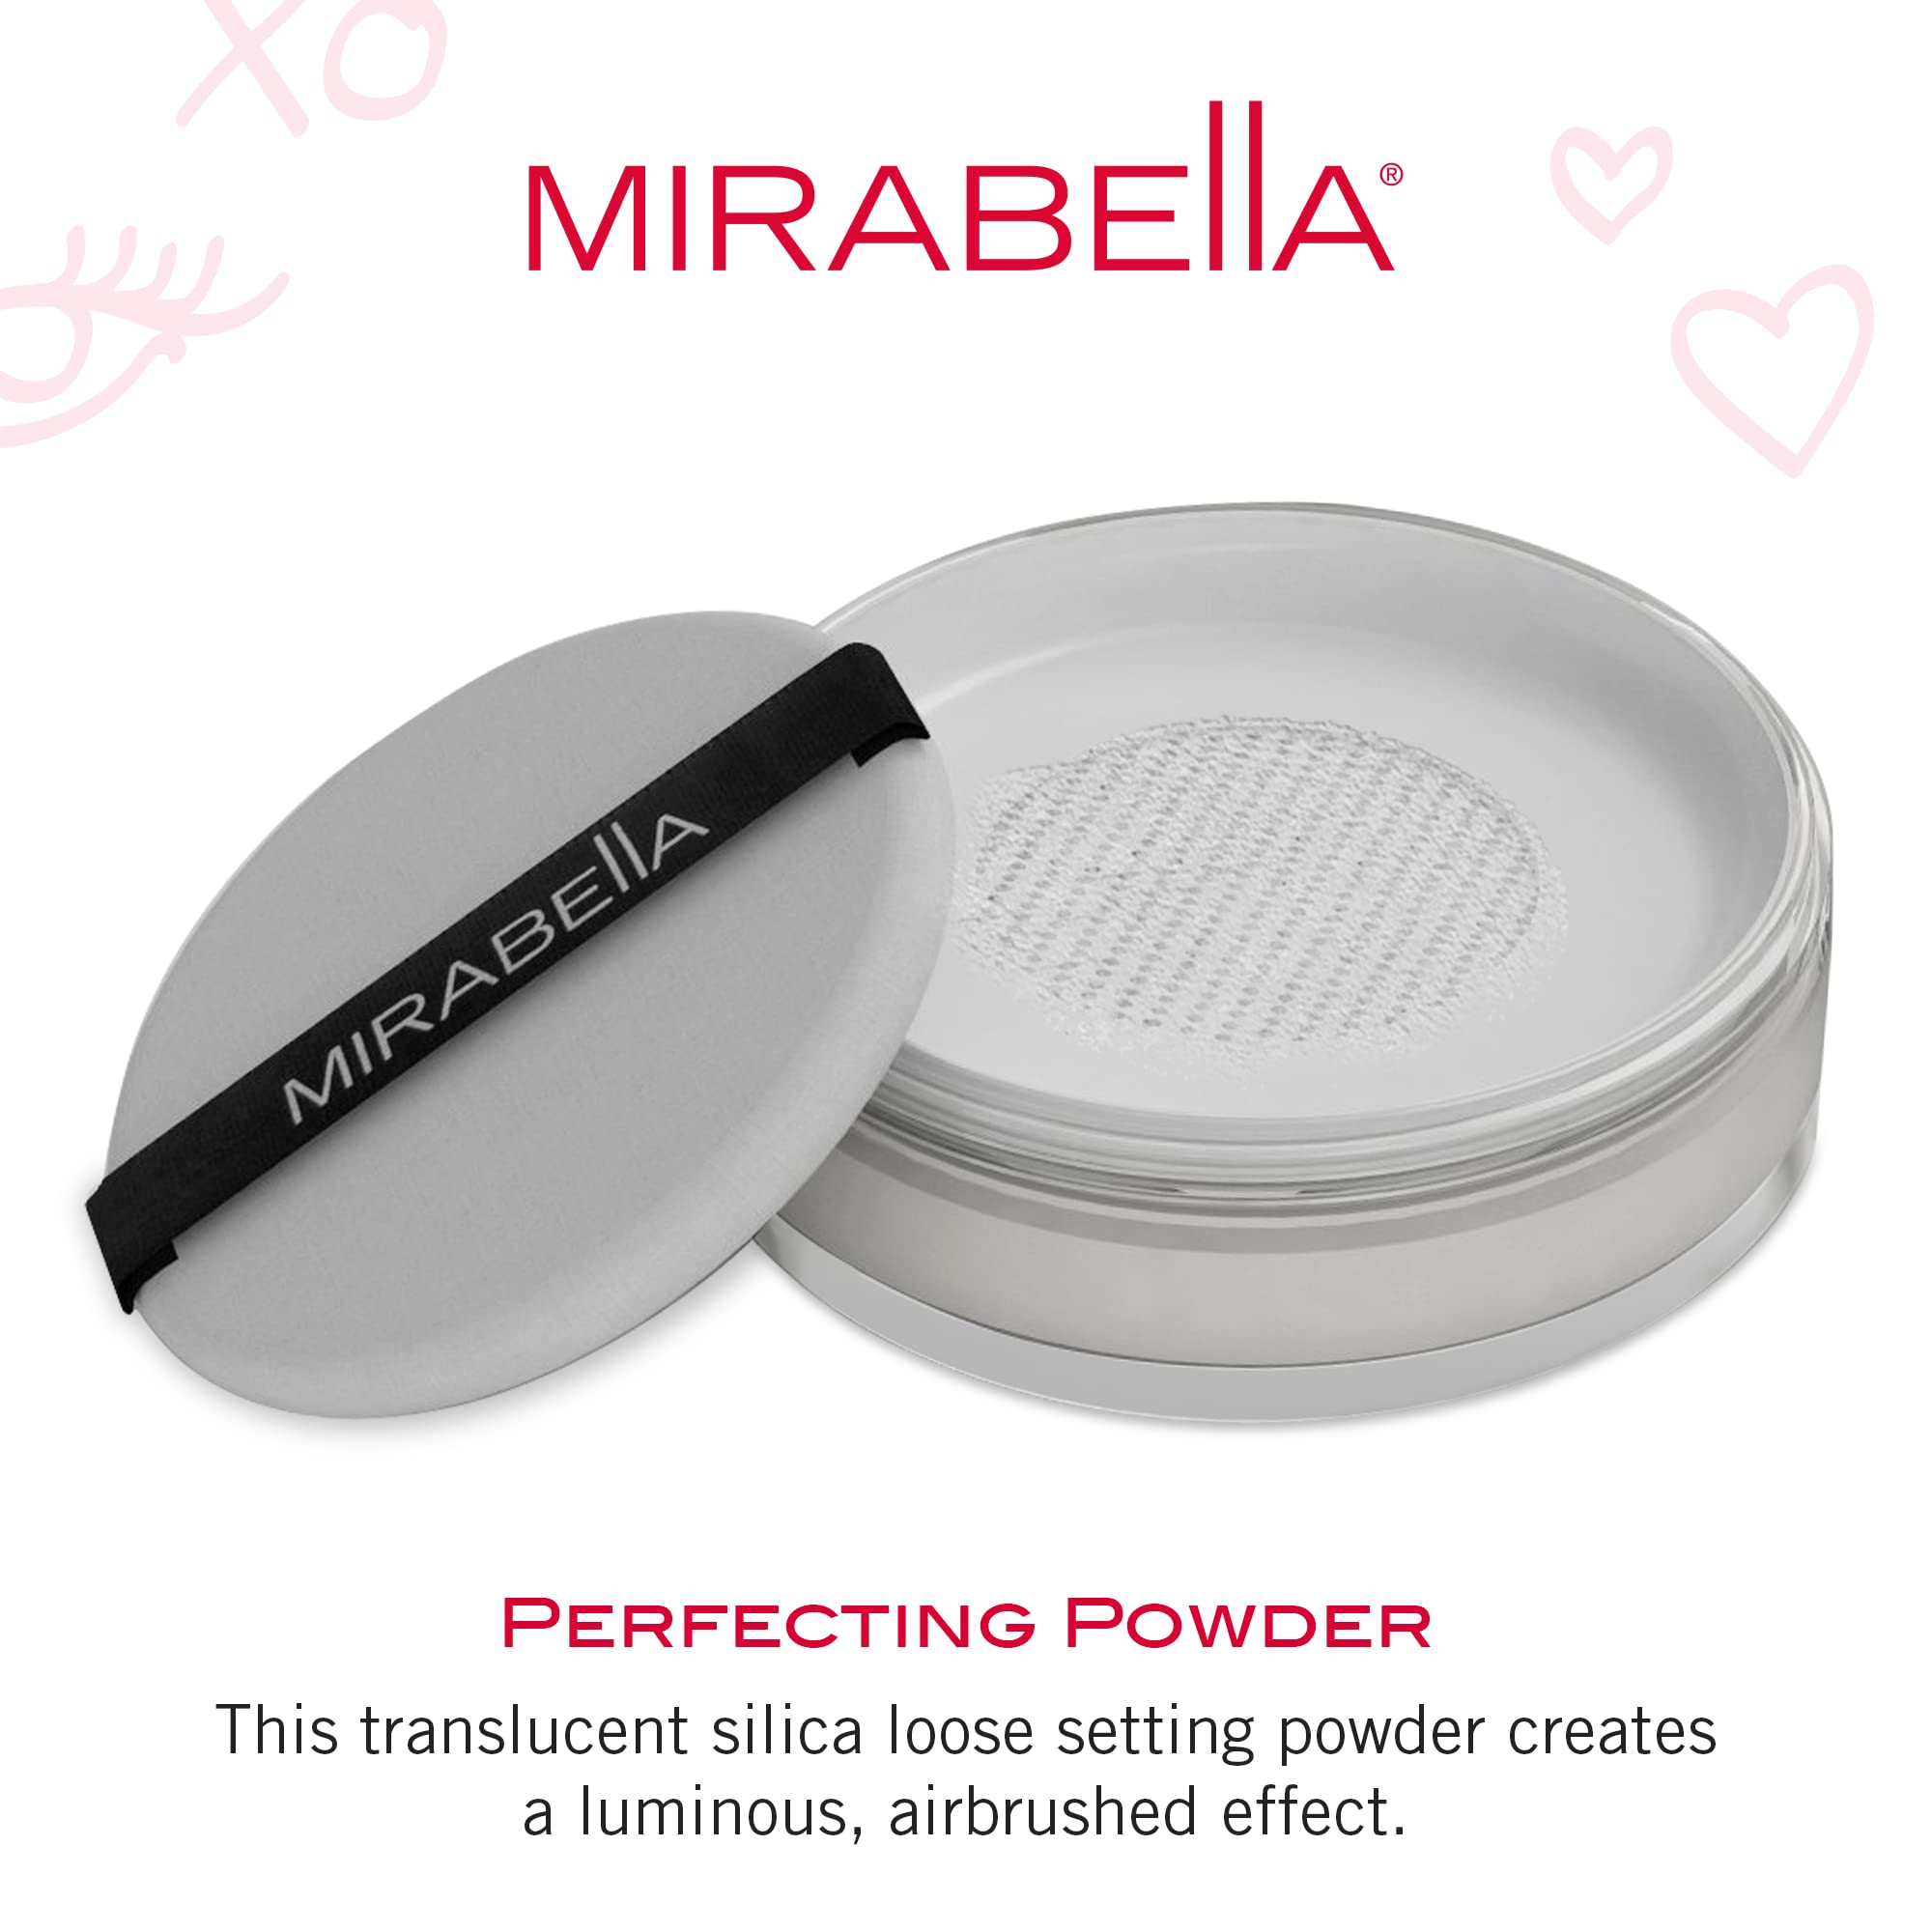 Mirabella Perfecting Loose Powder, Translucent, Anti-Aging, Light-Diffusing Silica Makeup Setting Powder with Antioxidants with Oil Control. Matte Finish for all Skin Types